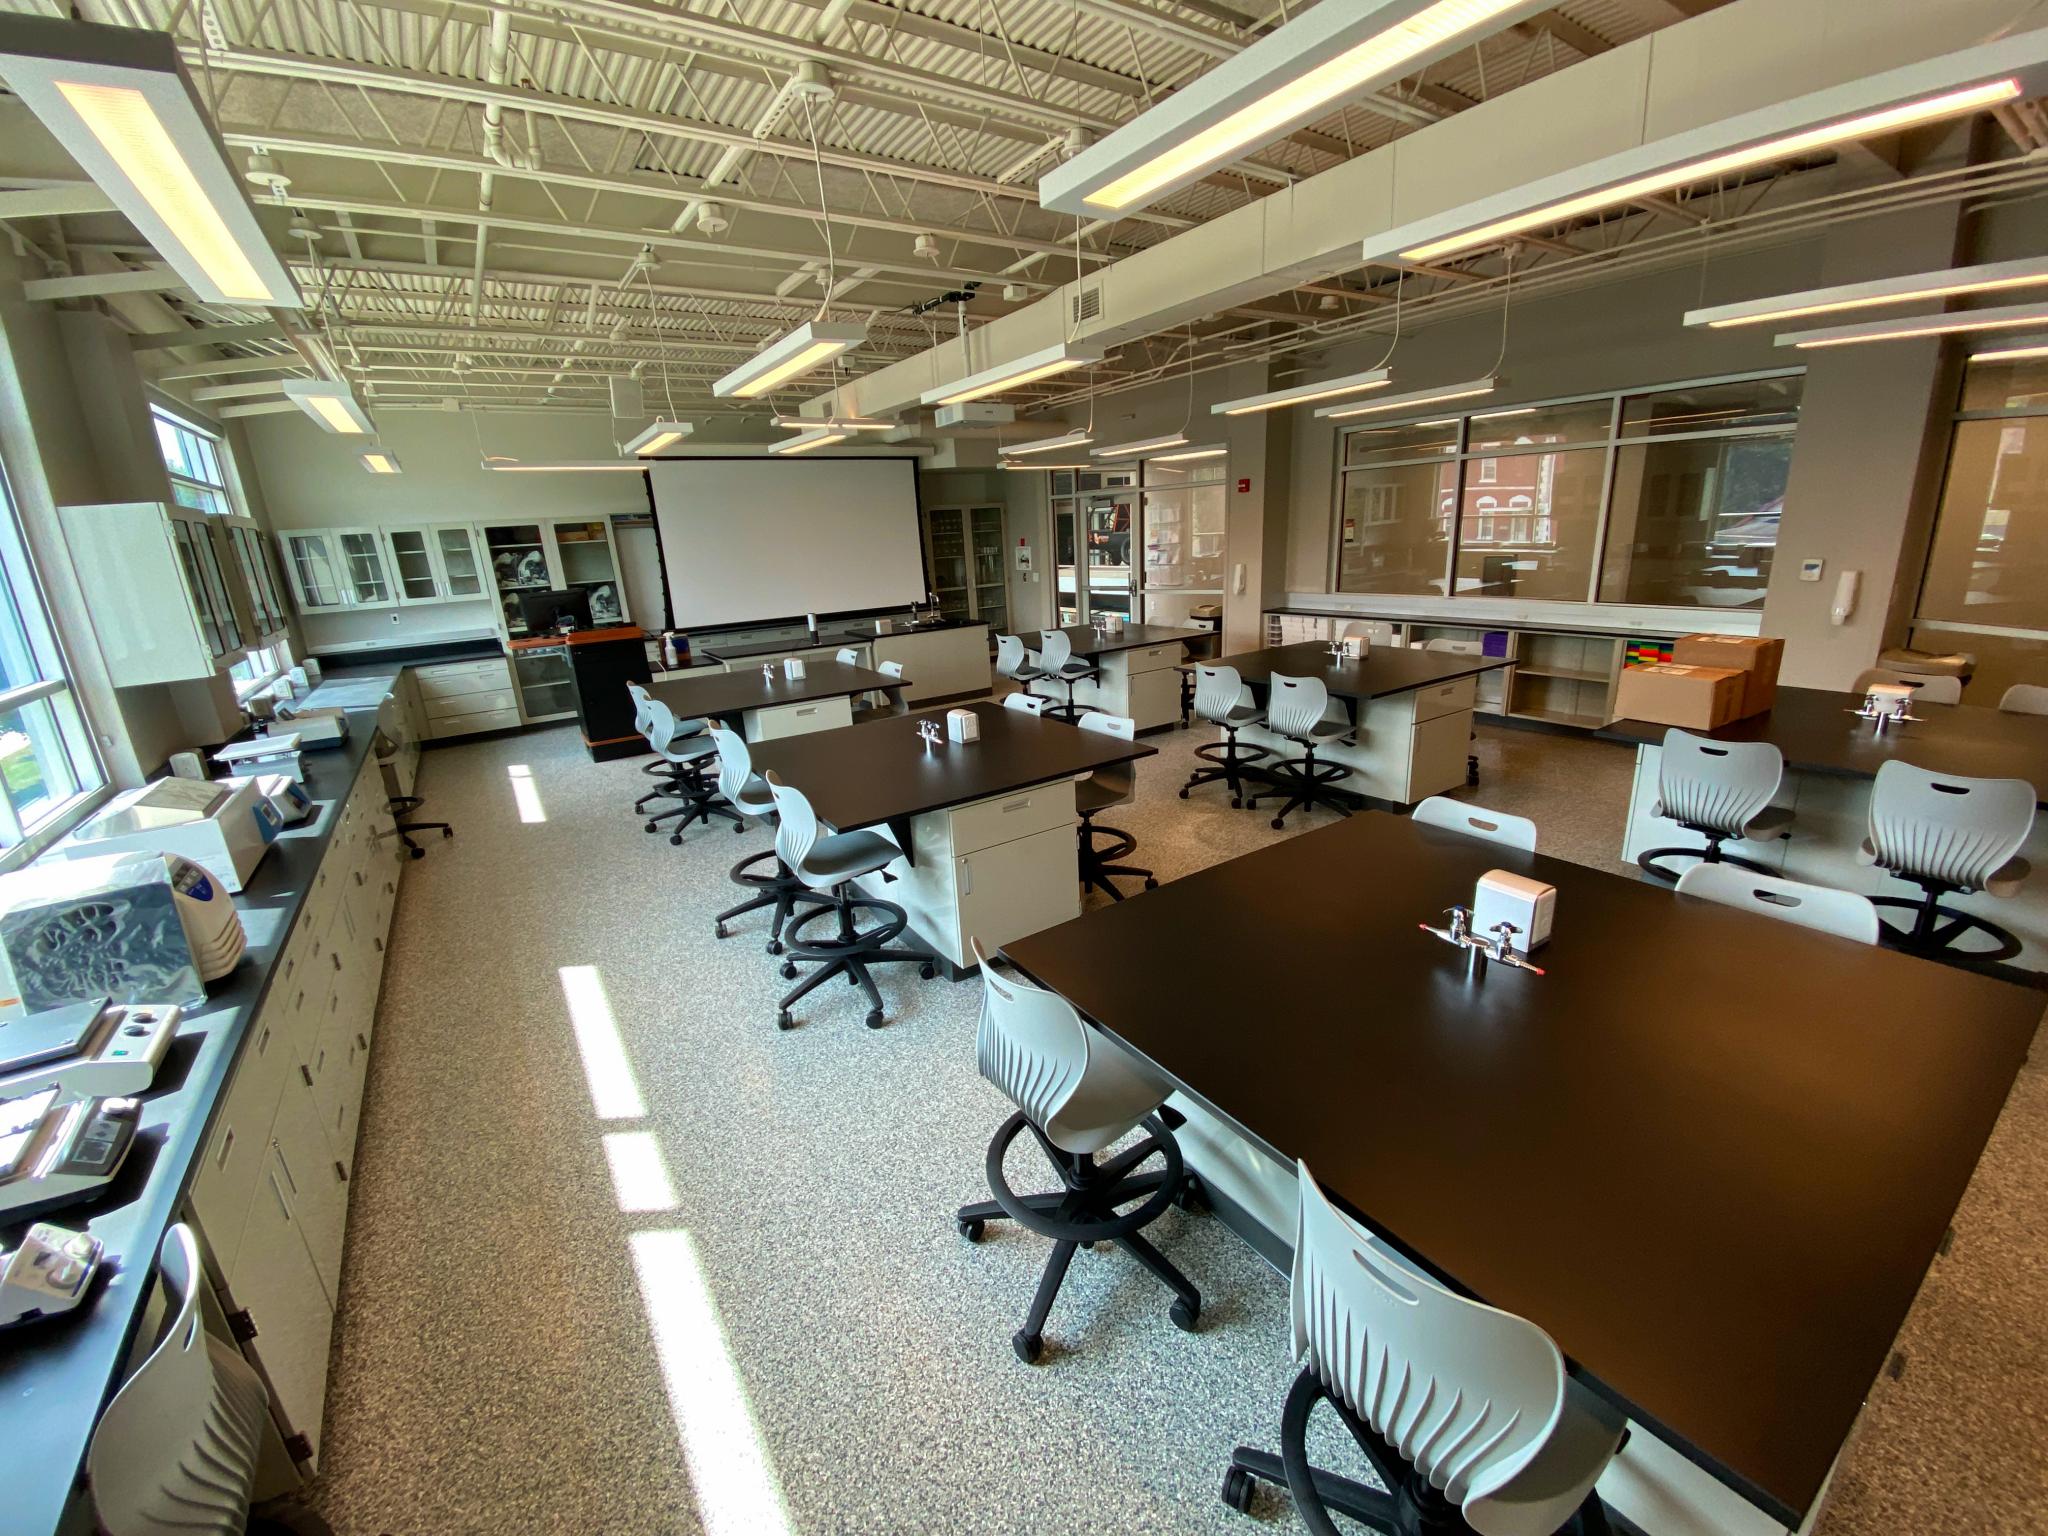 image of science lab space with countertops